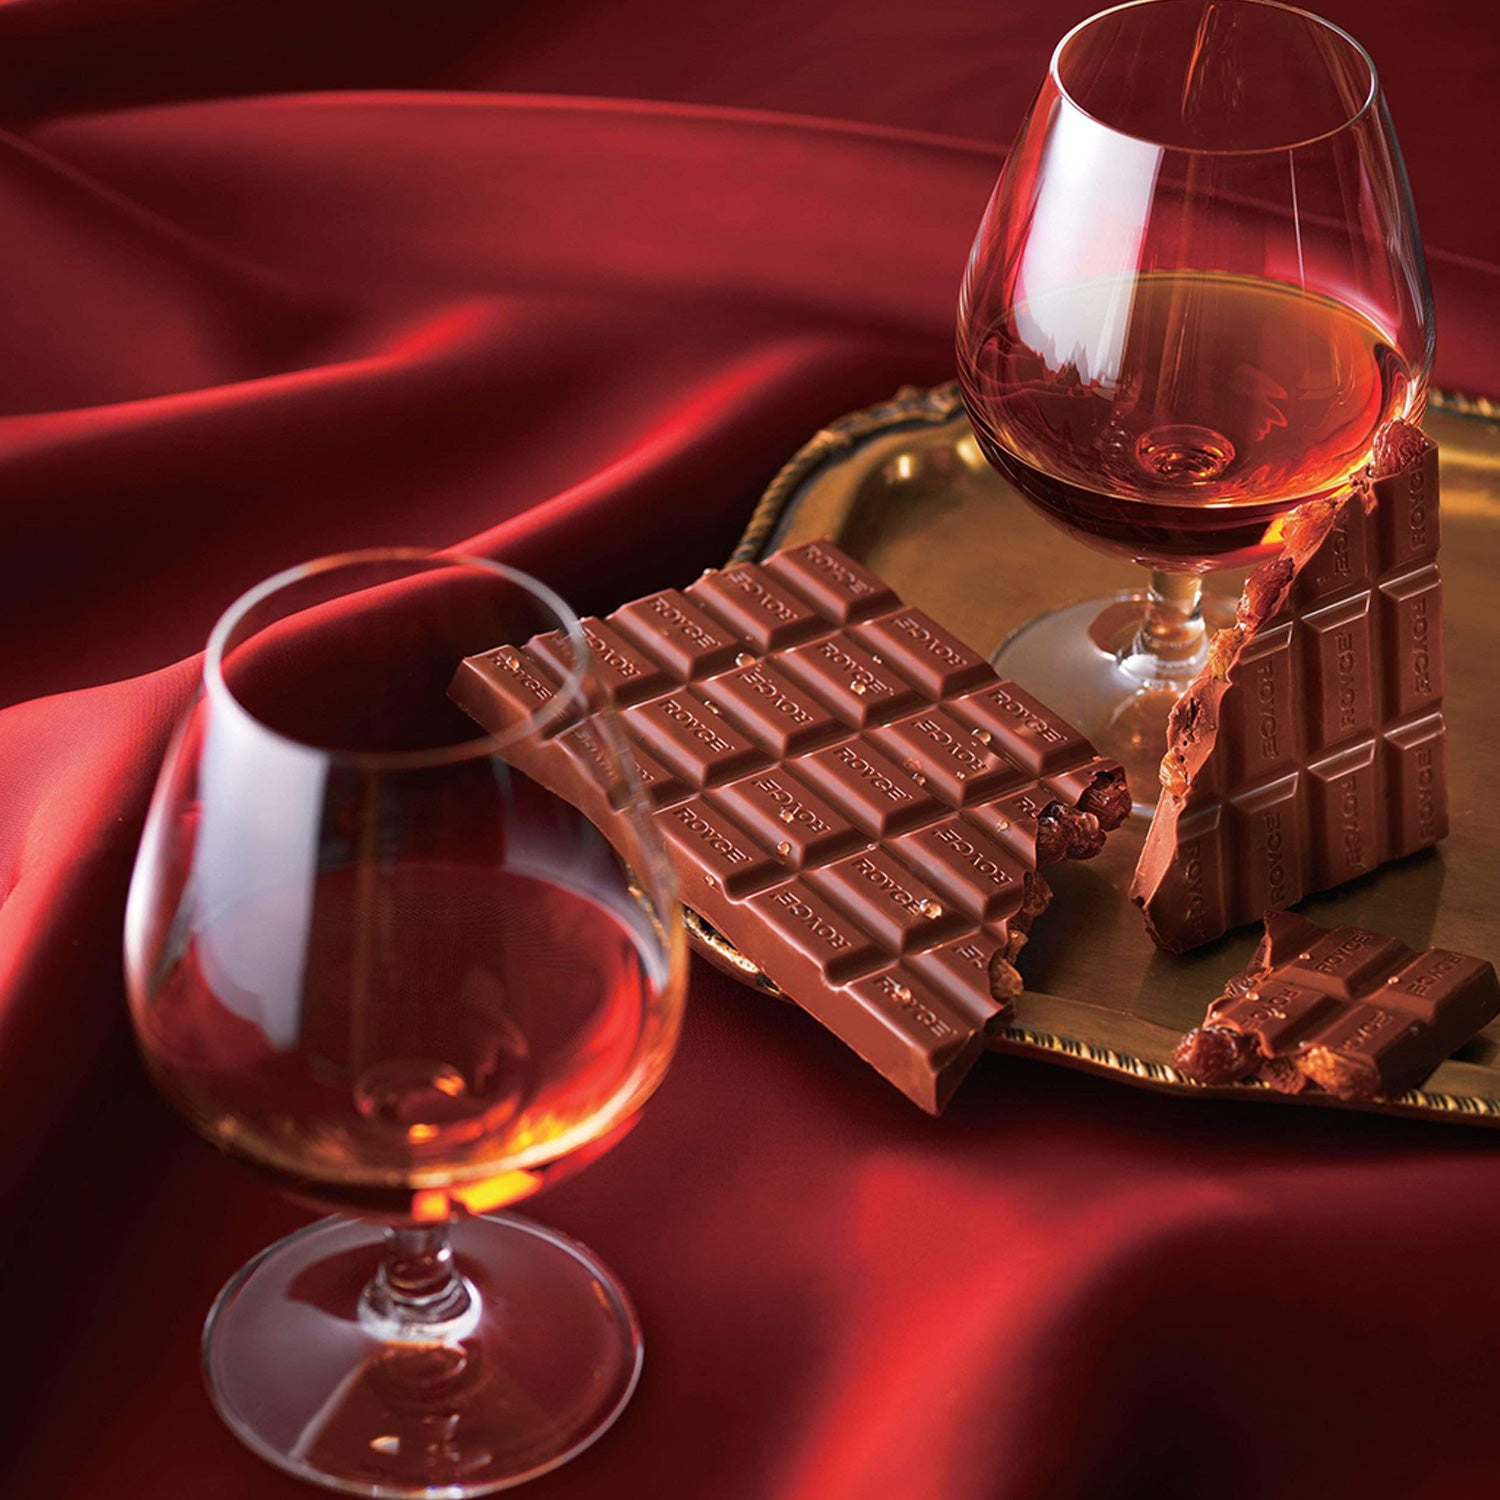 ROYCE' Chocolate - Chocolate Bar "Cognac & Raisin" - Image shows two glasses filled with amber-hued liquid and two brown chocolate bars with the word ROYCE' engraved multiple times on each. Accents include a gold tray and a silky, rippled red tablecloth for background.